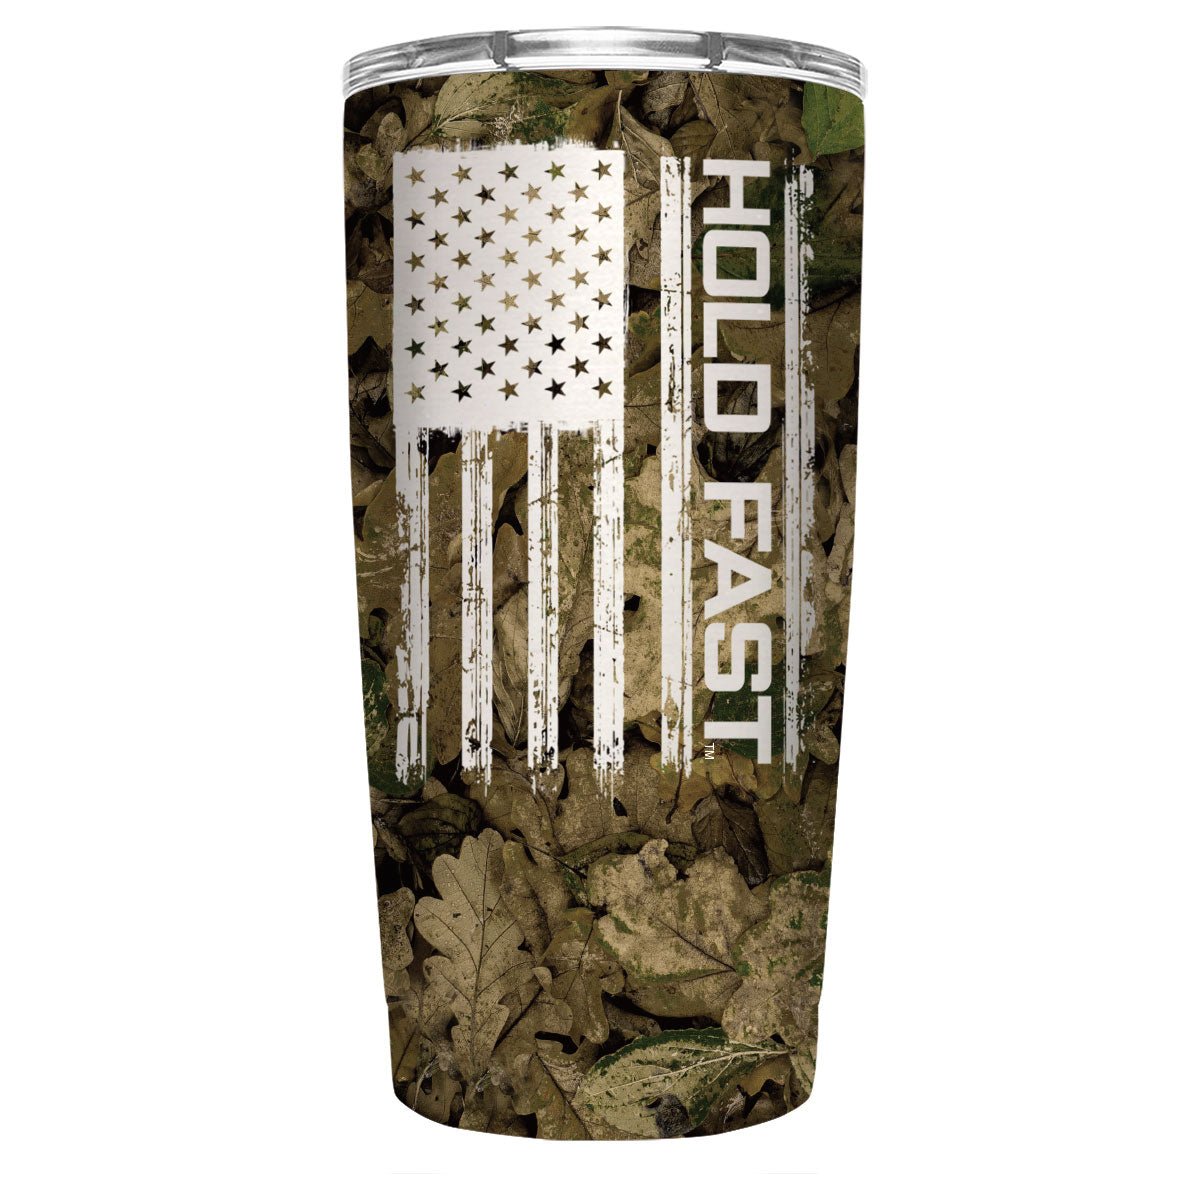 Kerusso 22 oz Hunting Camo Flag Stainless Steel Tumbler | 2FruitBearers